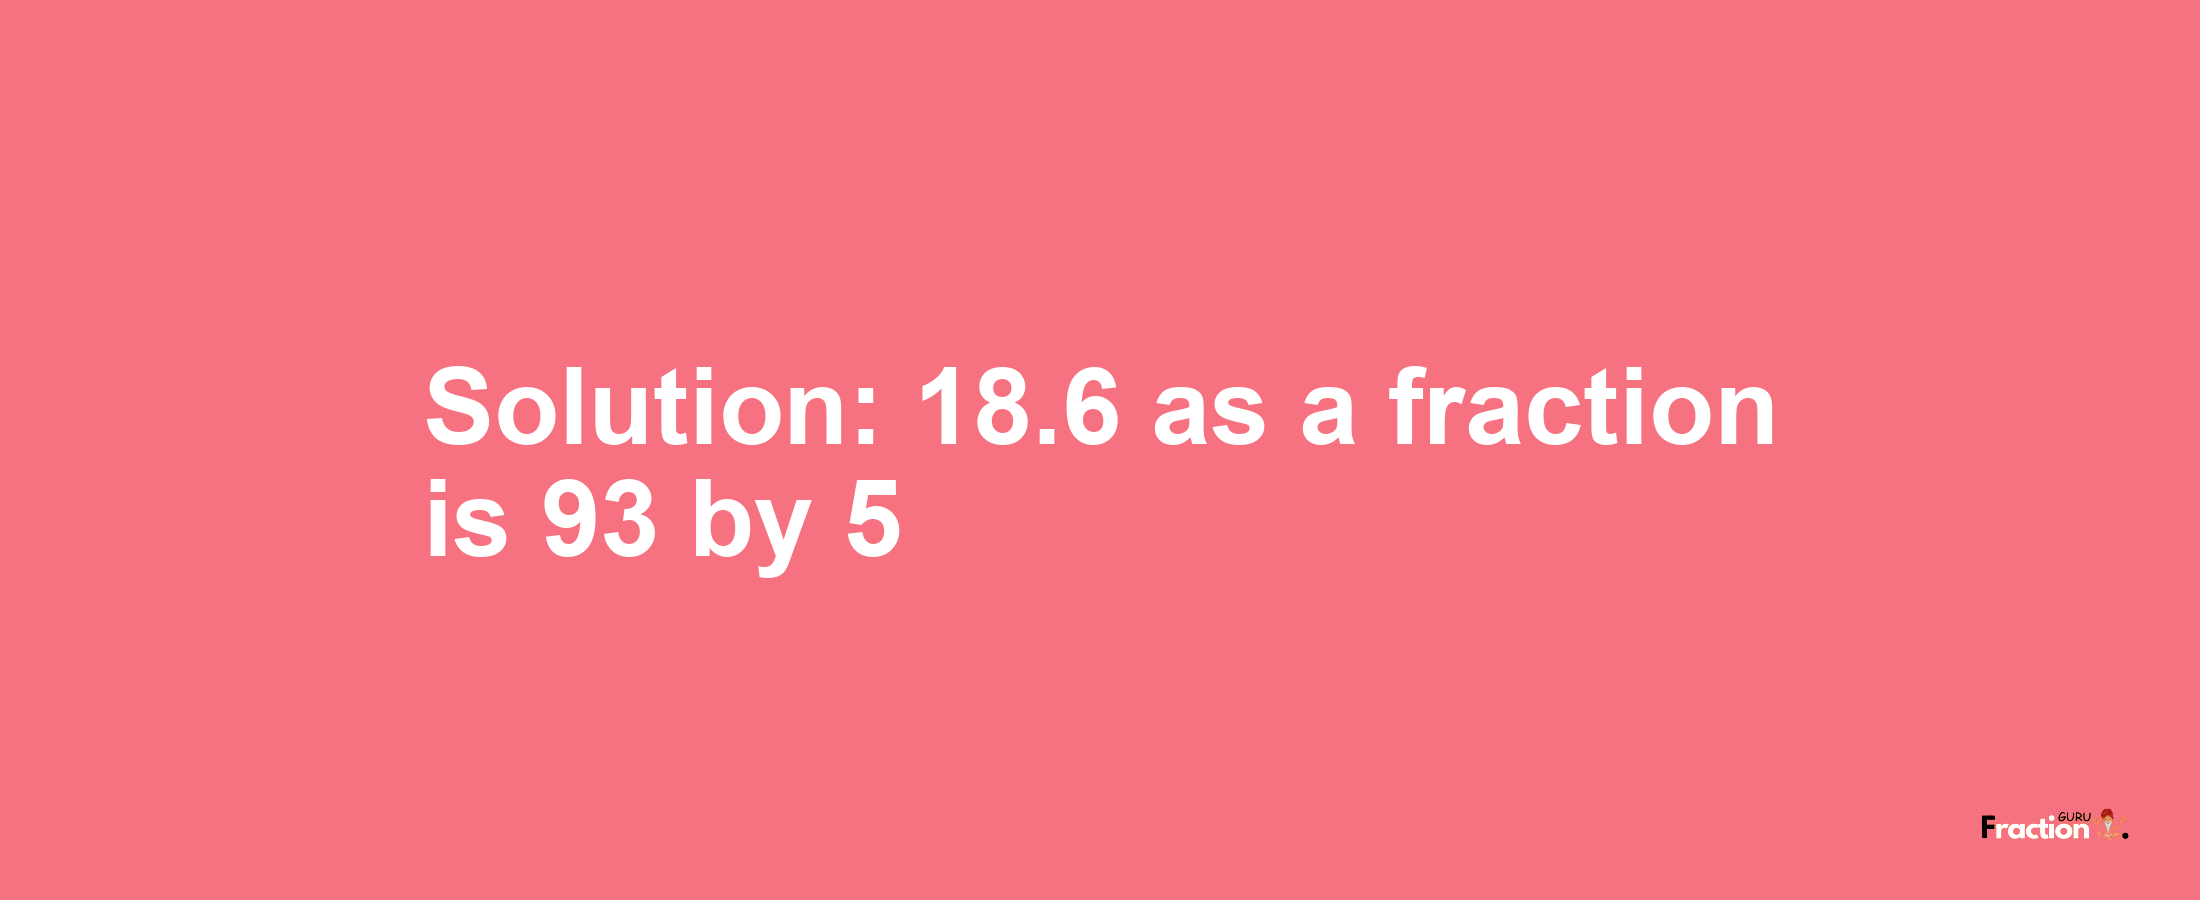 Solution:18.6 as a fraction is 93/5